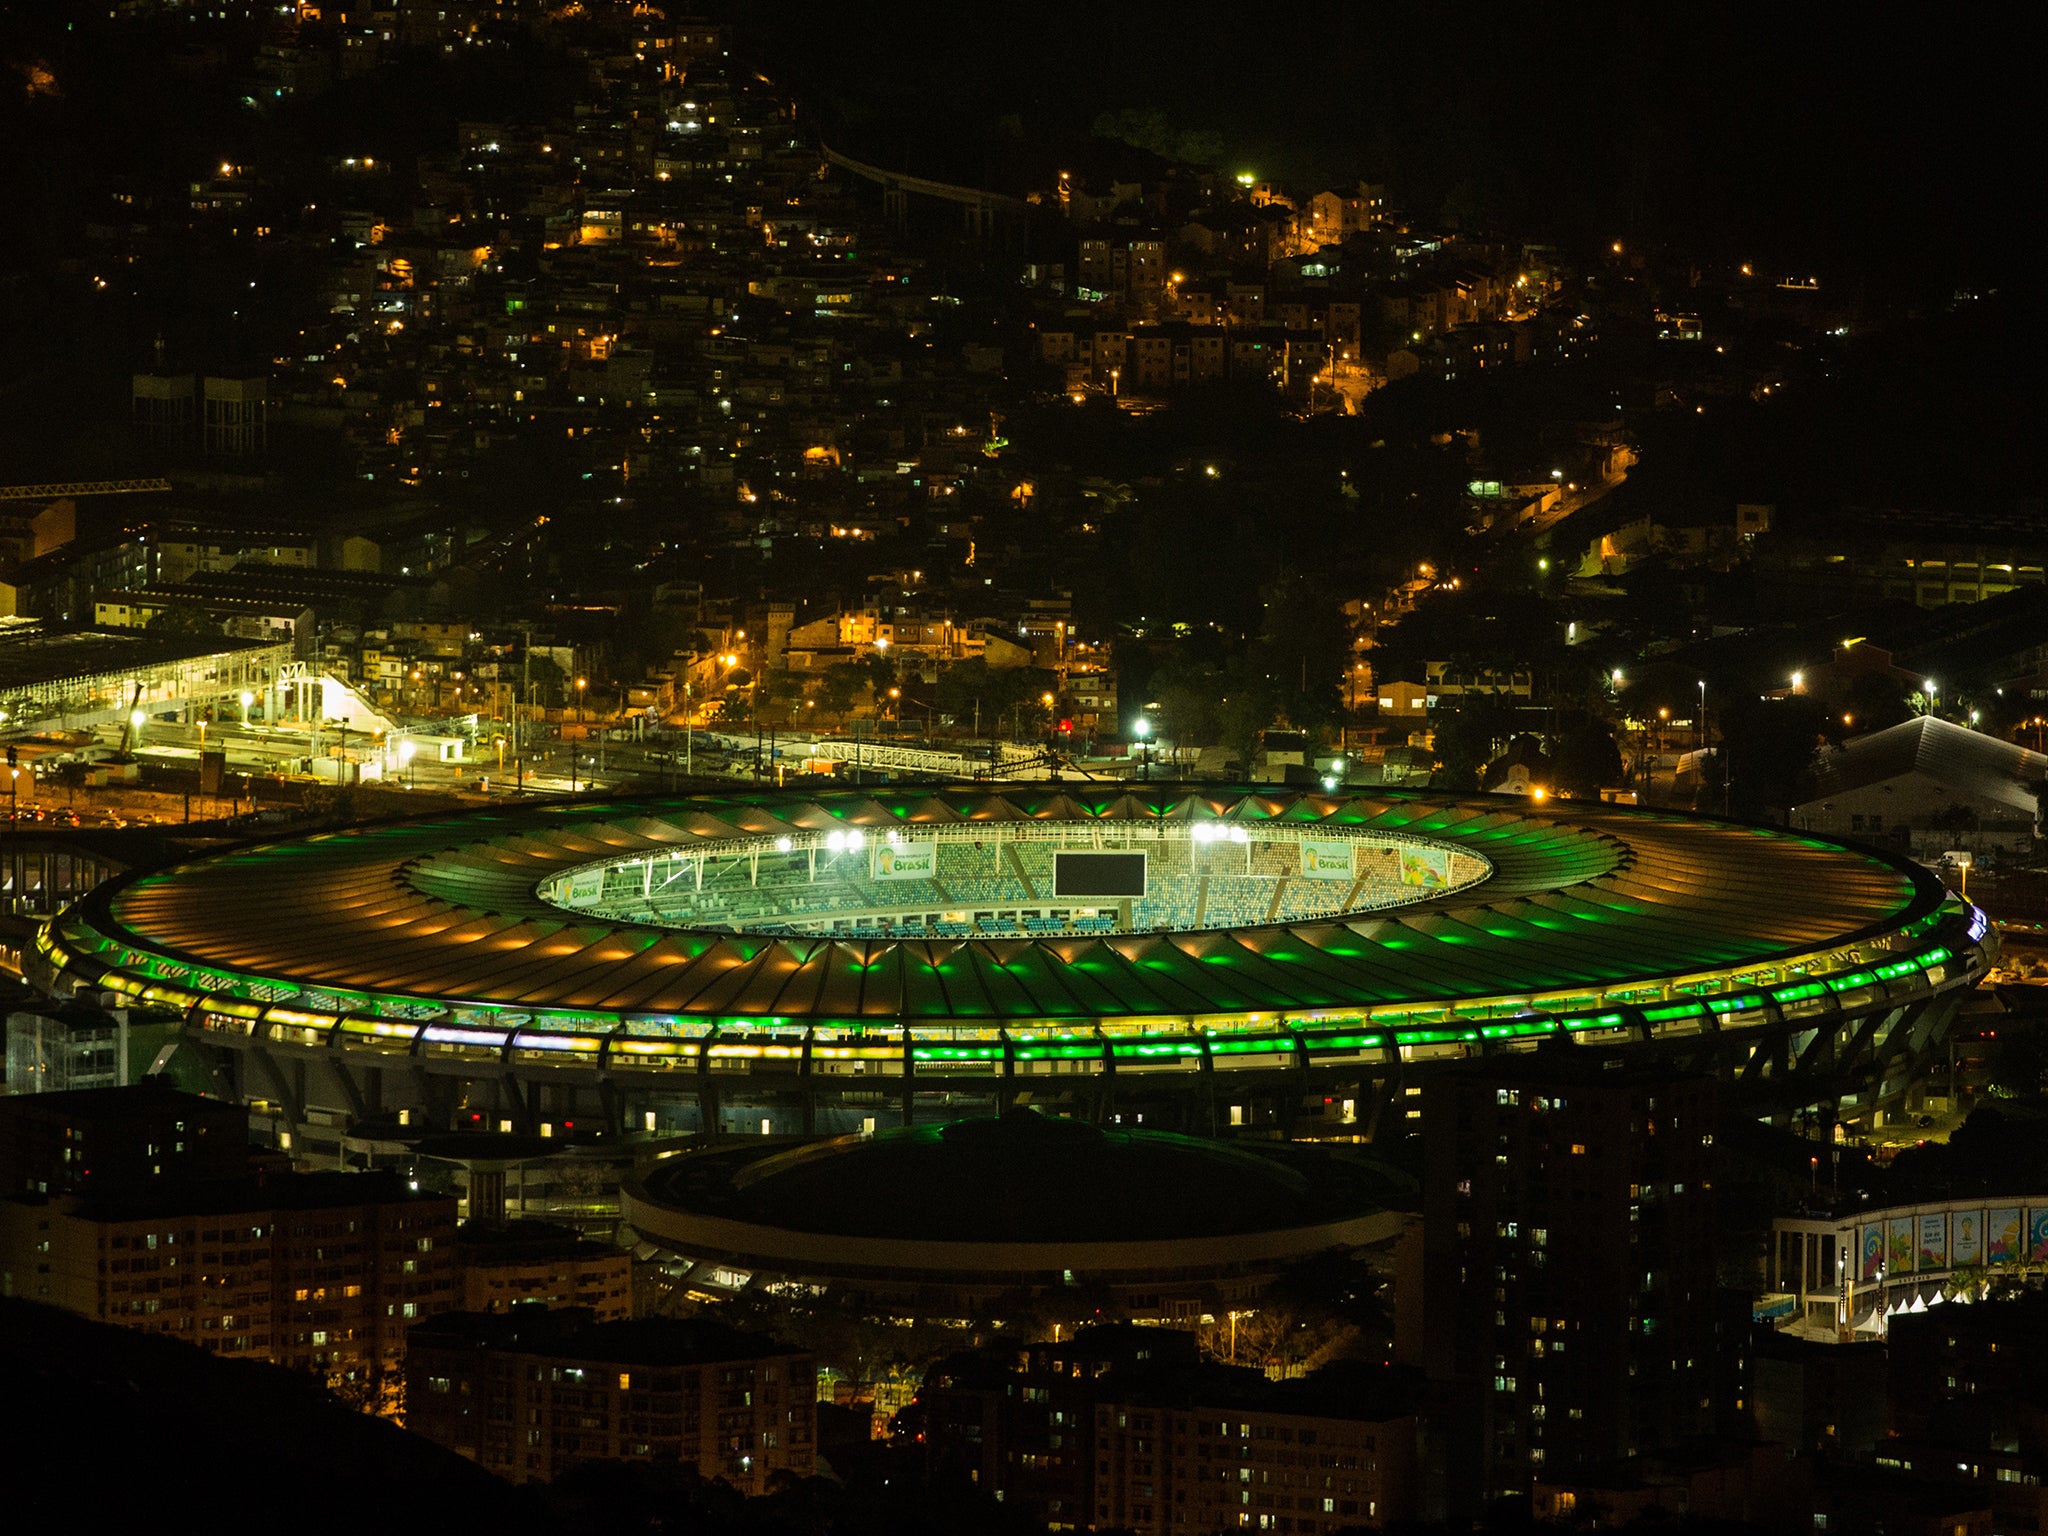 A view of the Maracana which will host the World Cup final